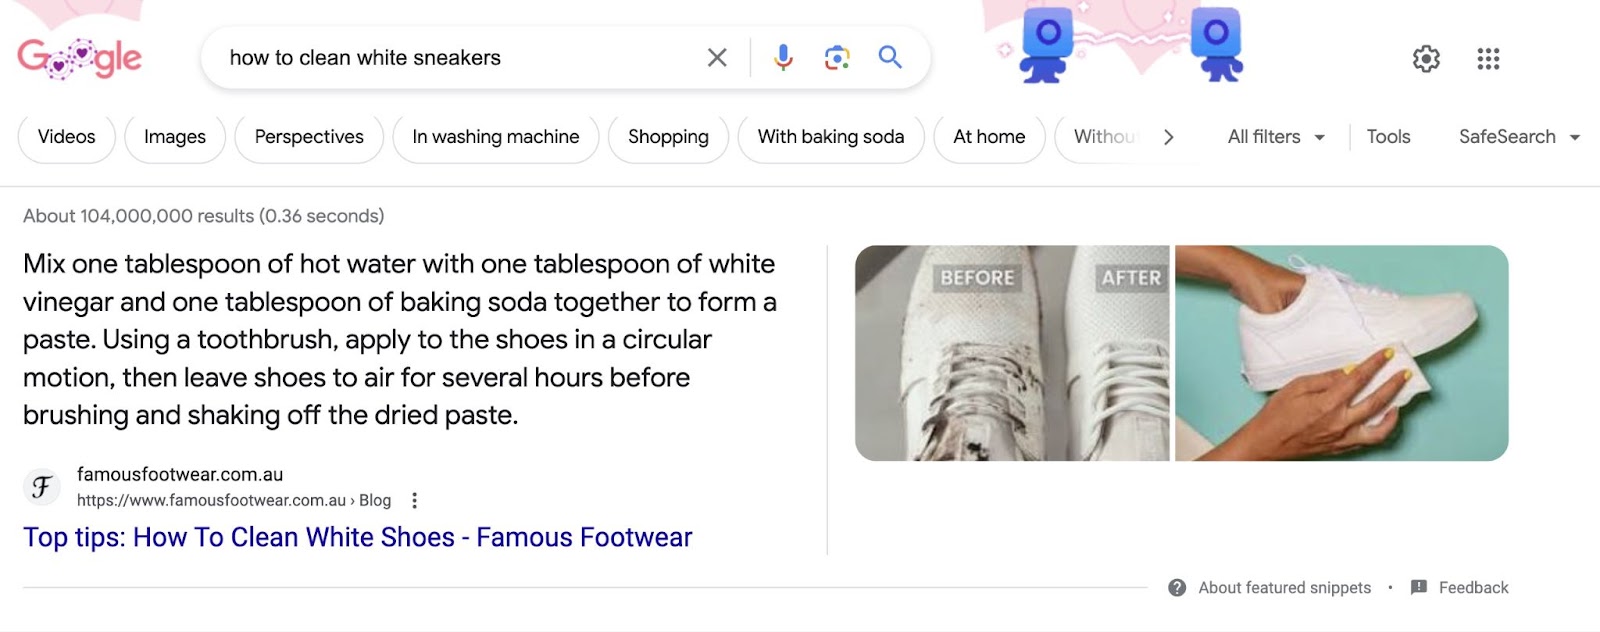 A featured snippet on Google SERP for "how to clean white sneakers" query